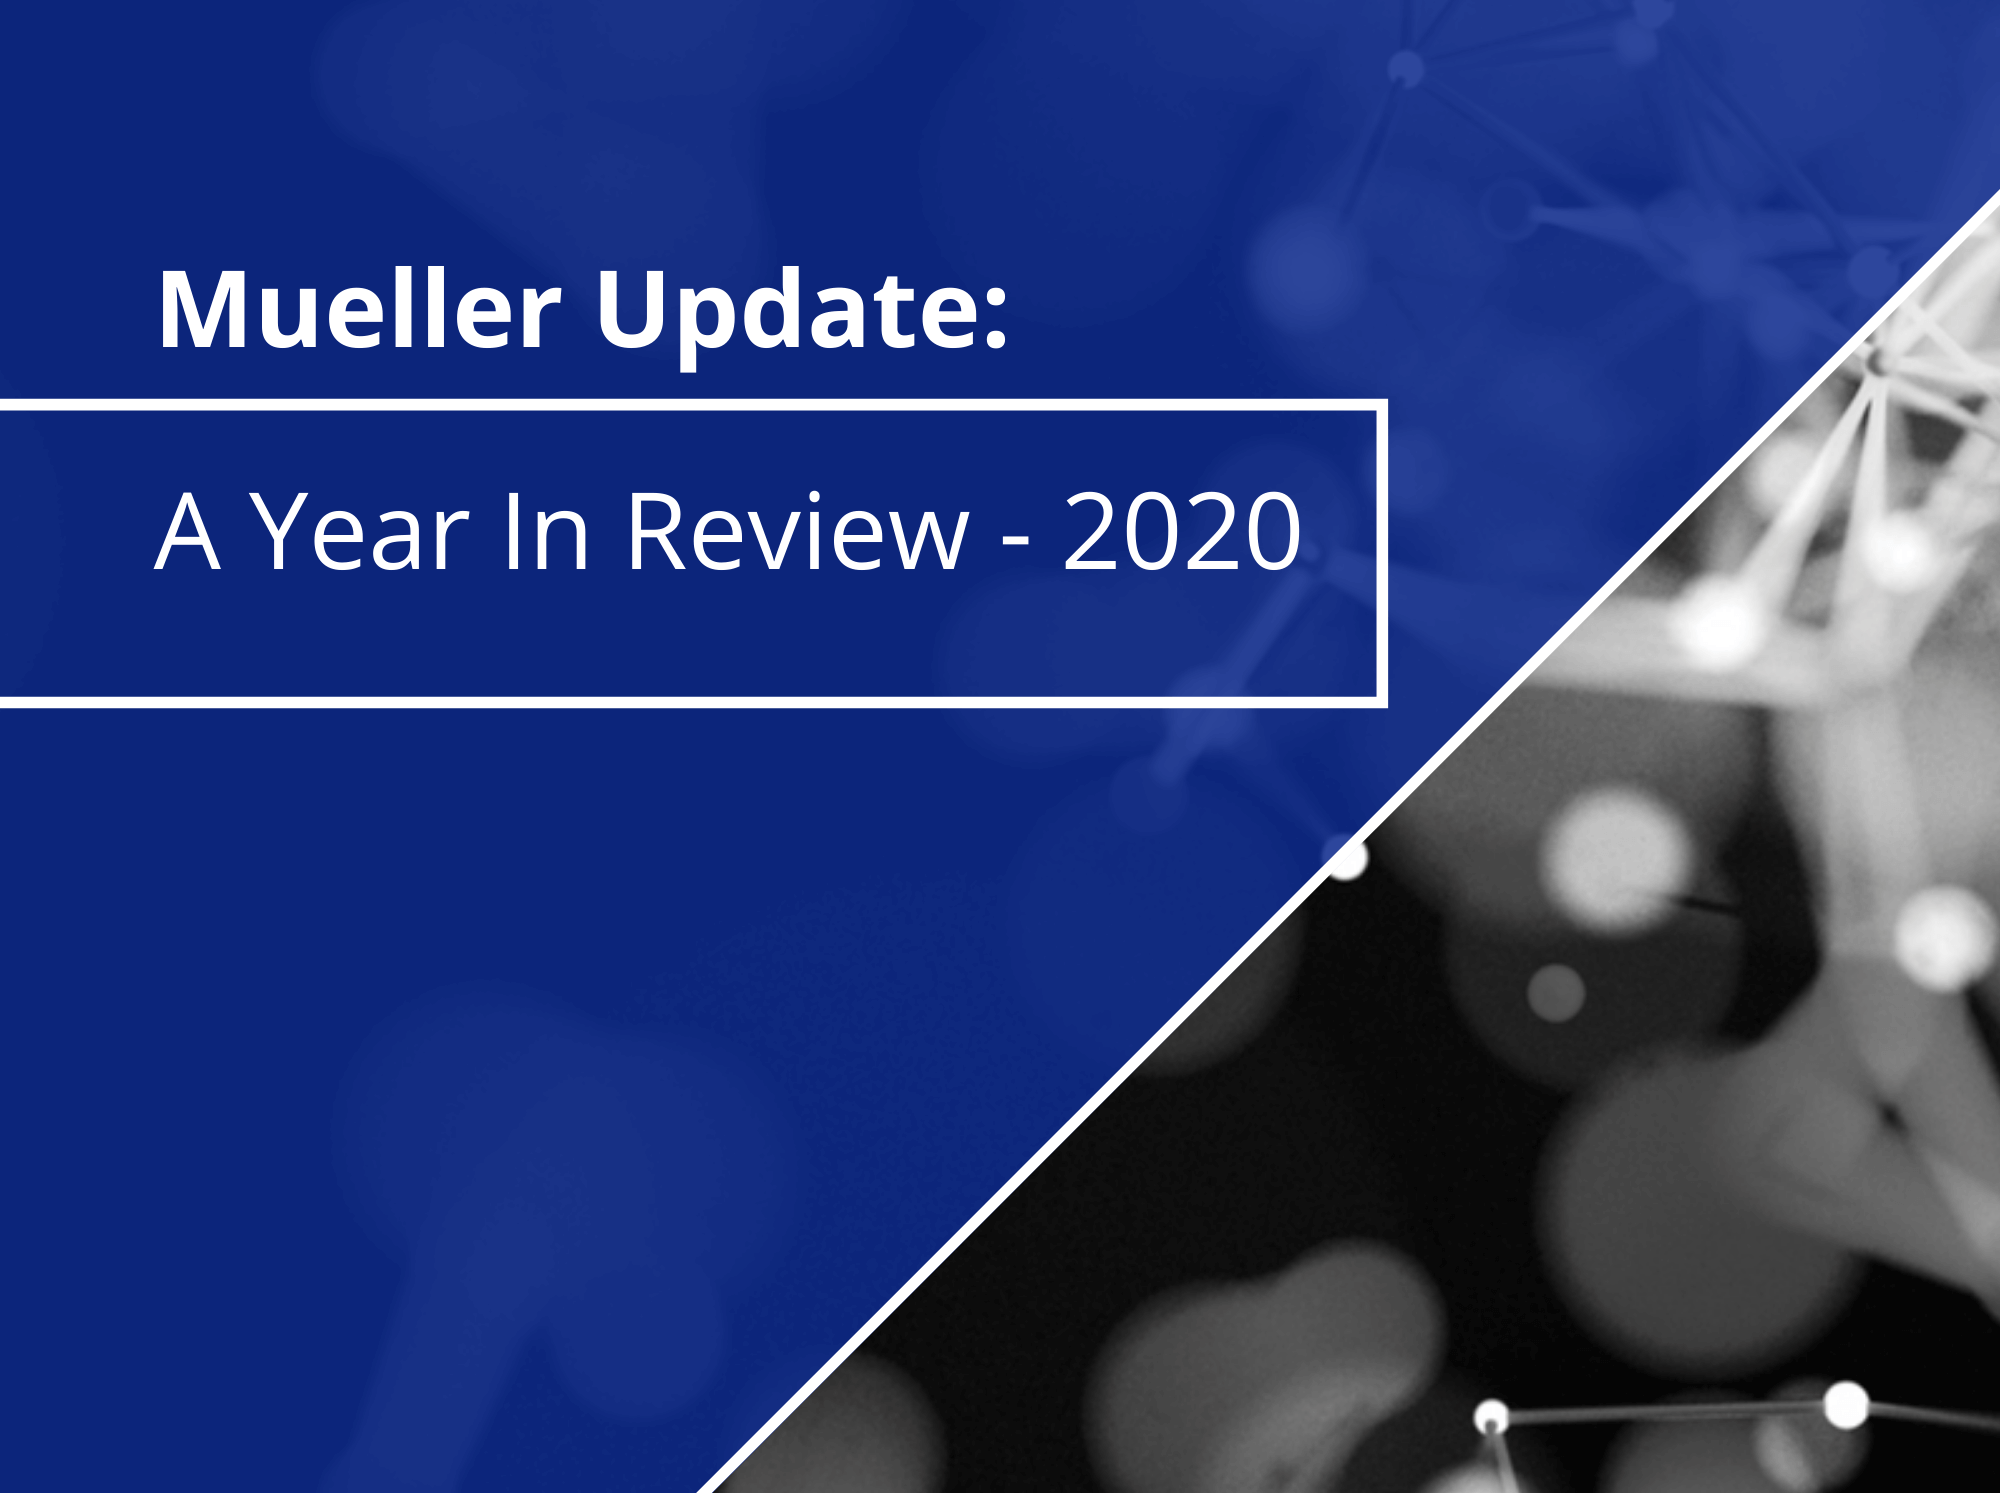 Mueller - A Year in Review 2020